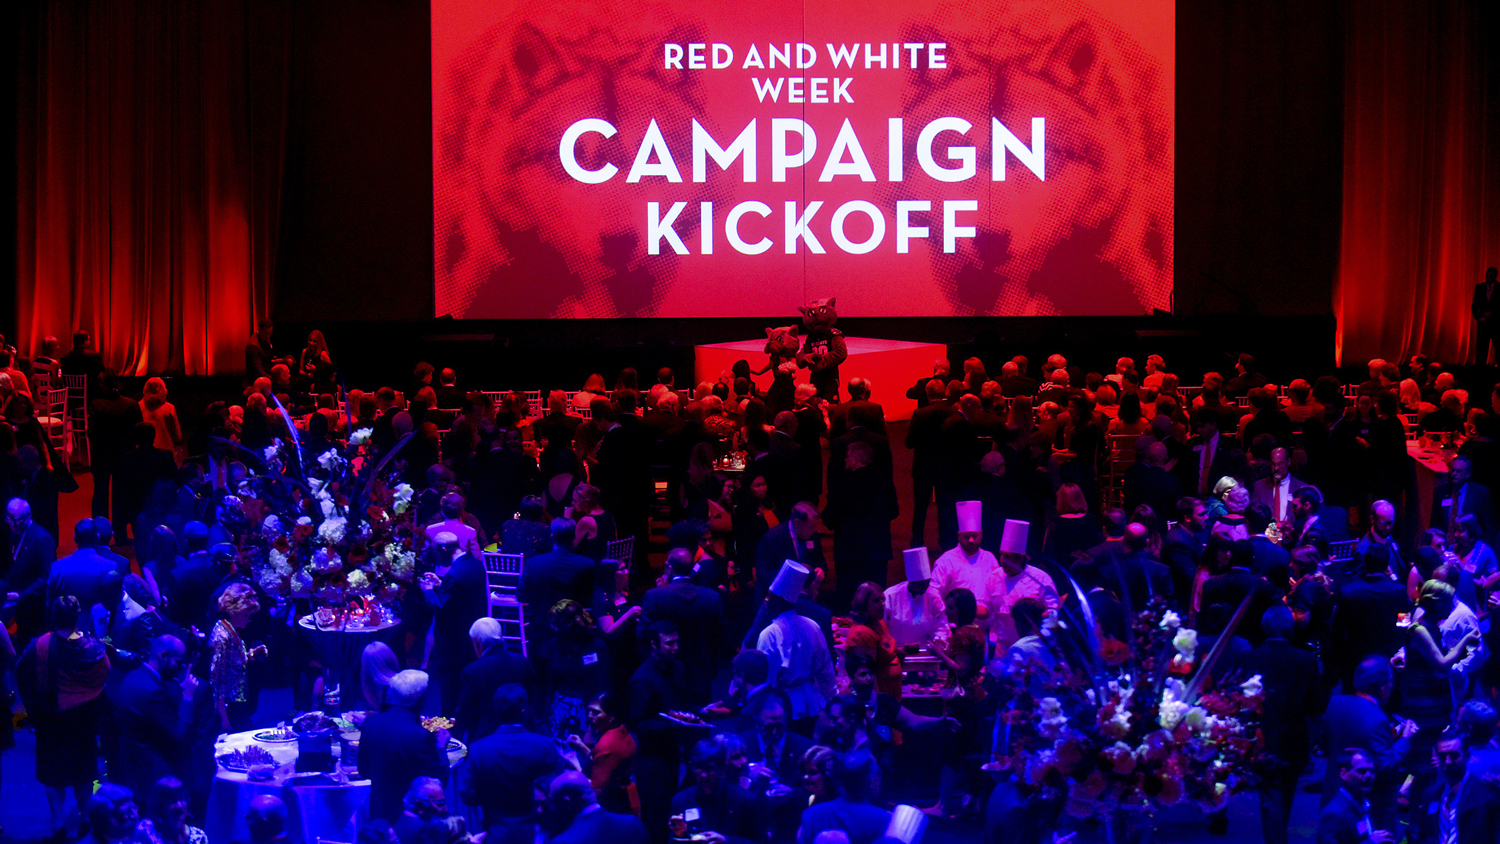 image of red and white week campaign kickoff